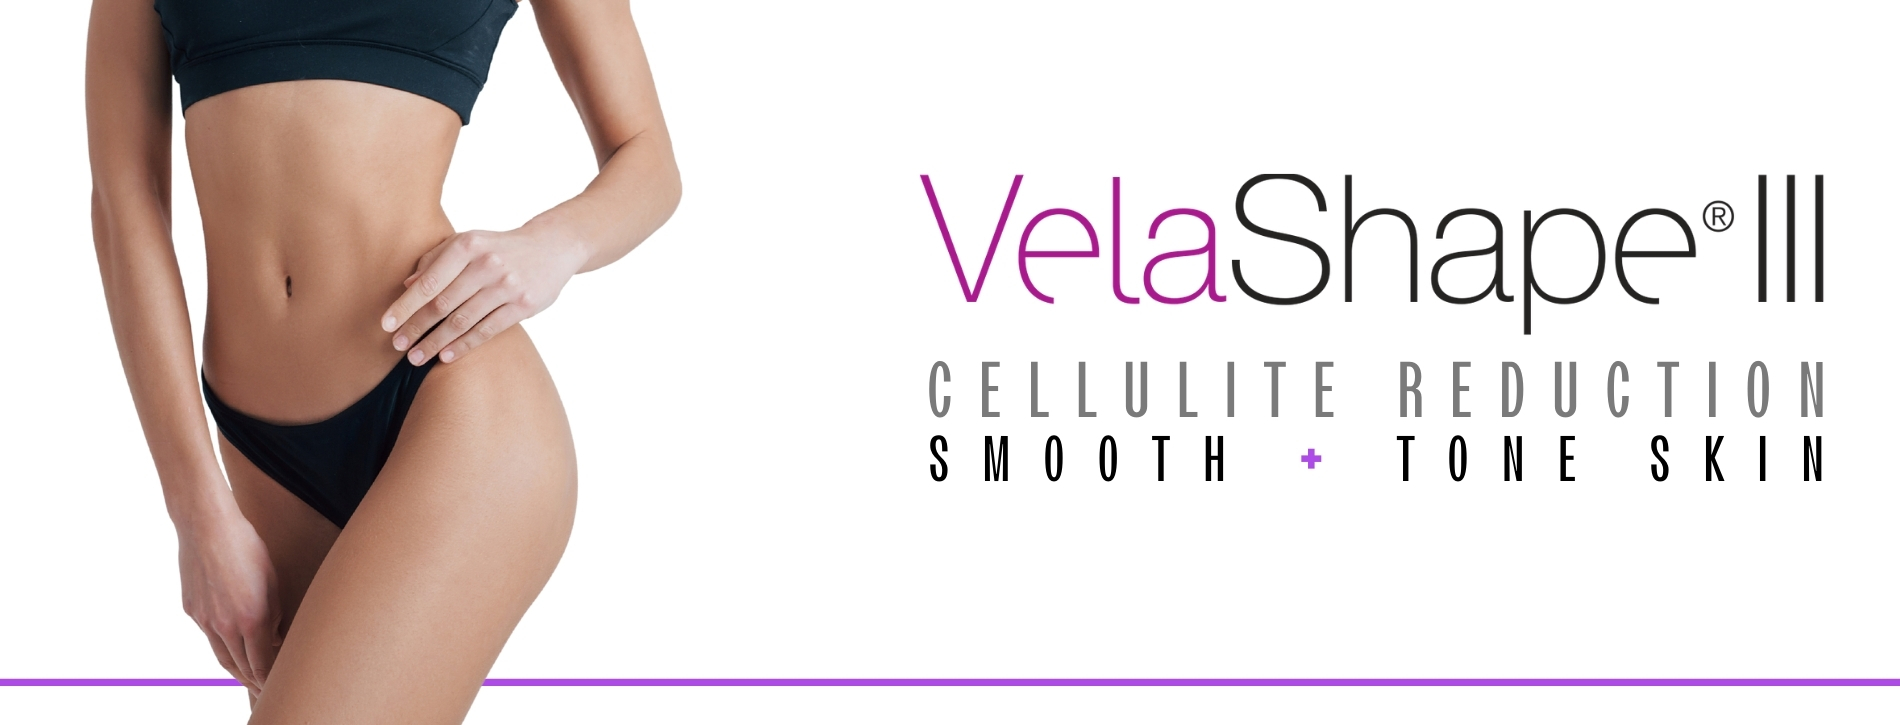 Woman's smooth and toned legs results from VelaShape.